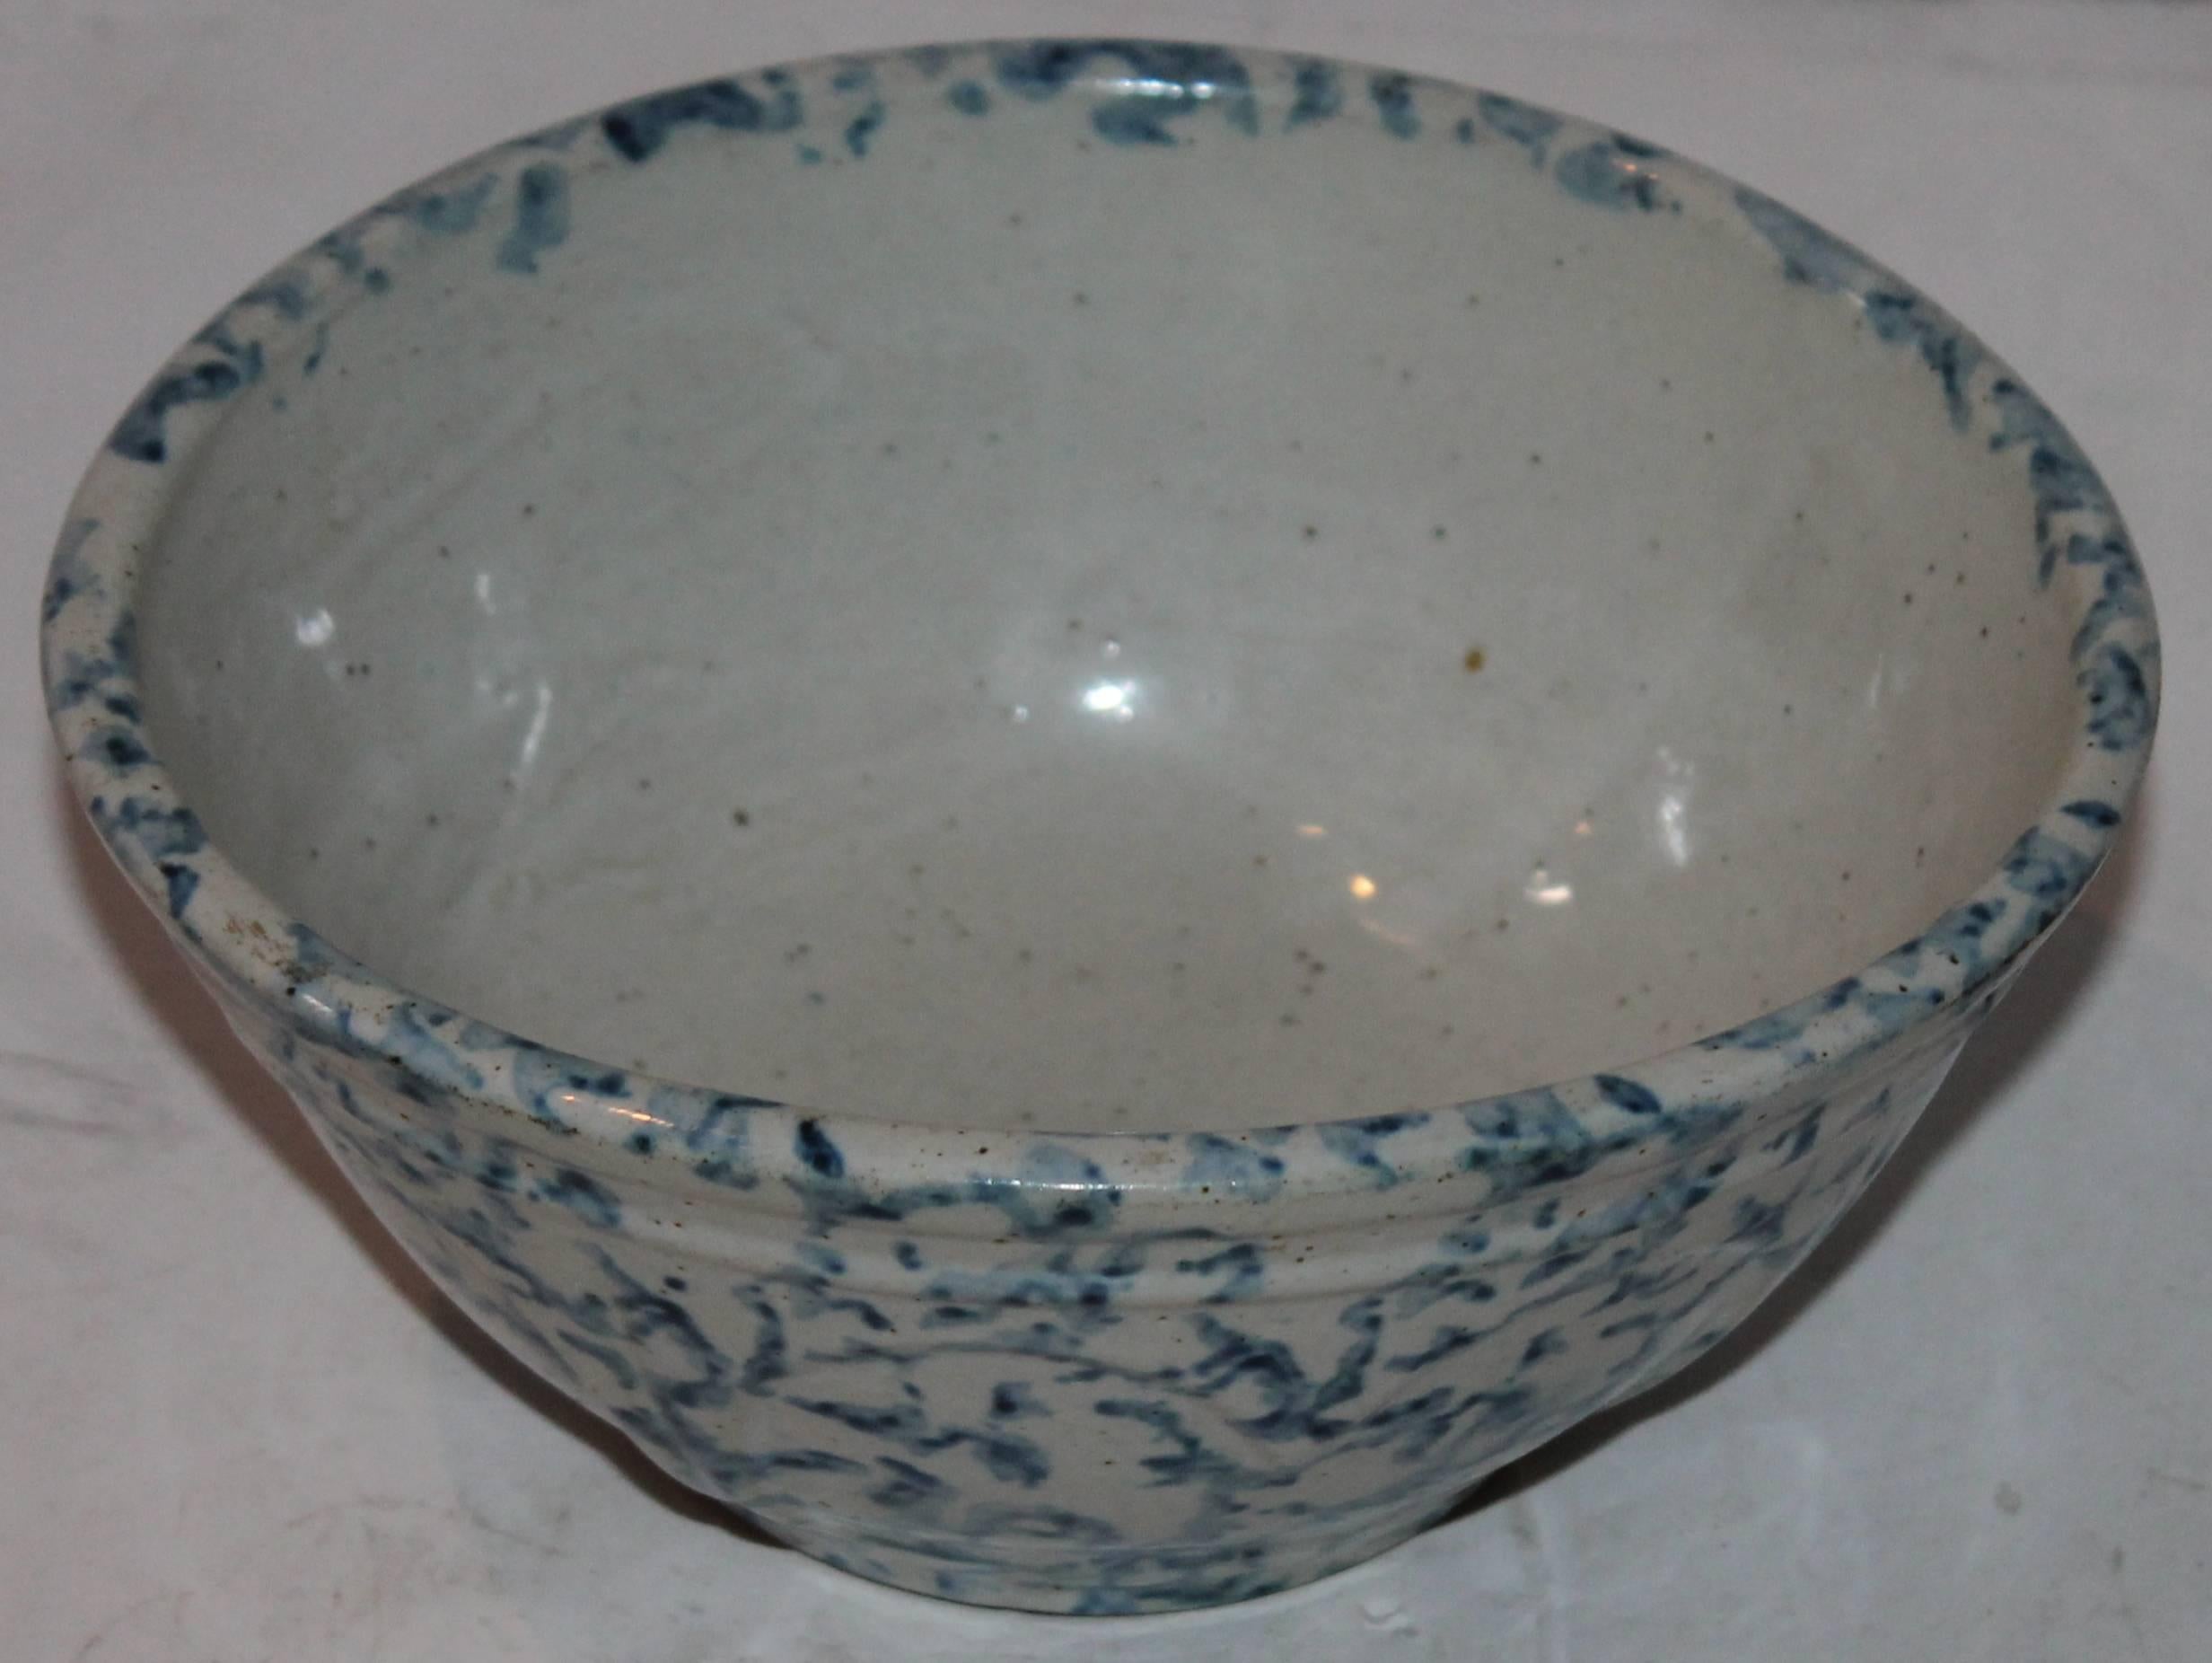 This is the coolest spongeware small berry bowl. Looks like a miniaturized mixing bowl. The condition is very good.